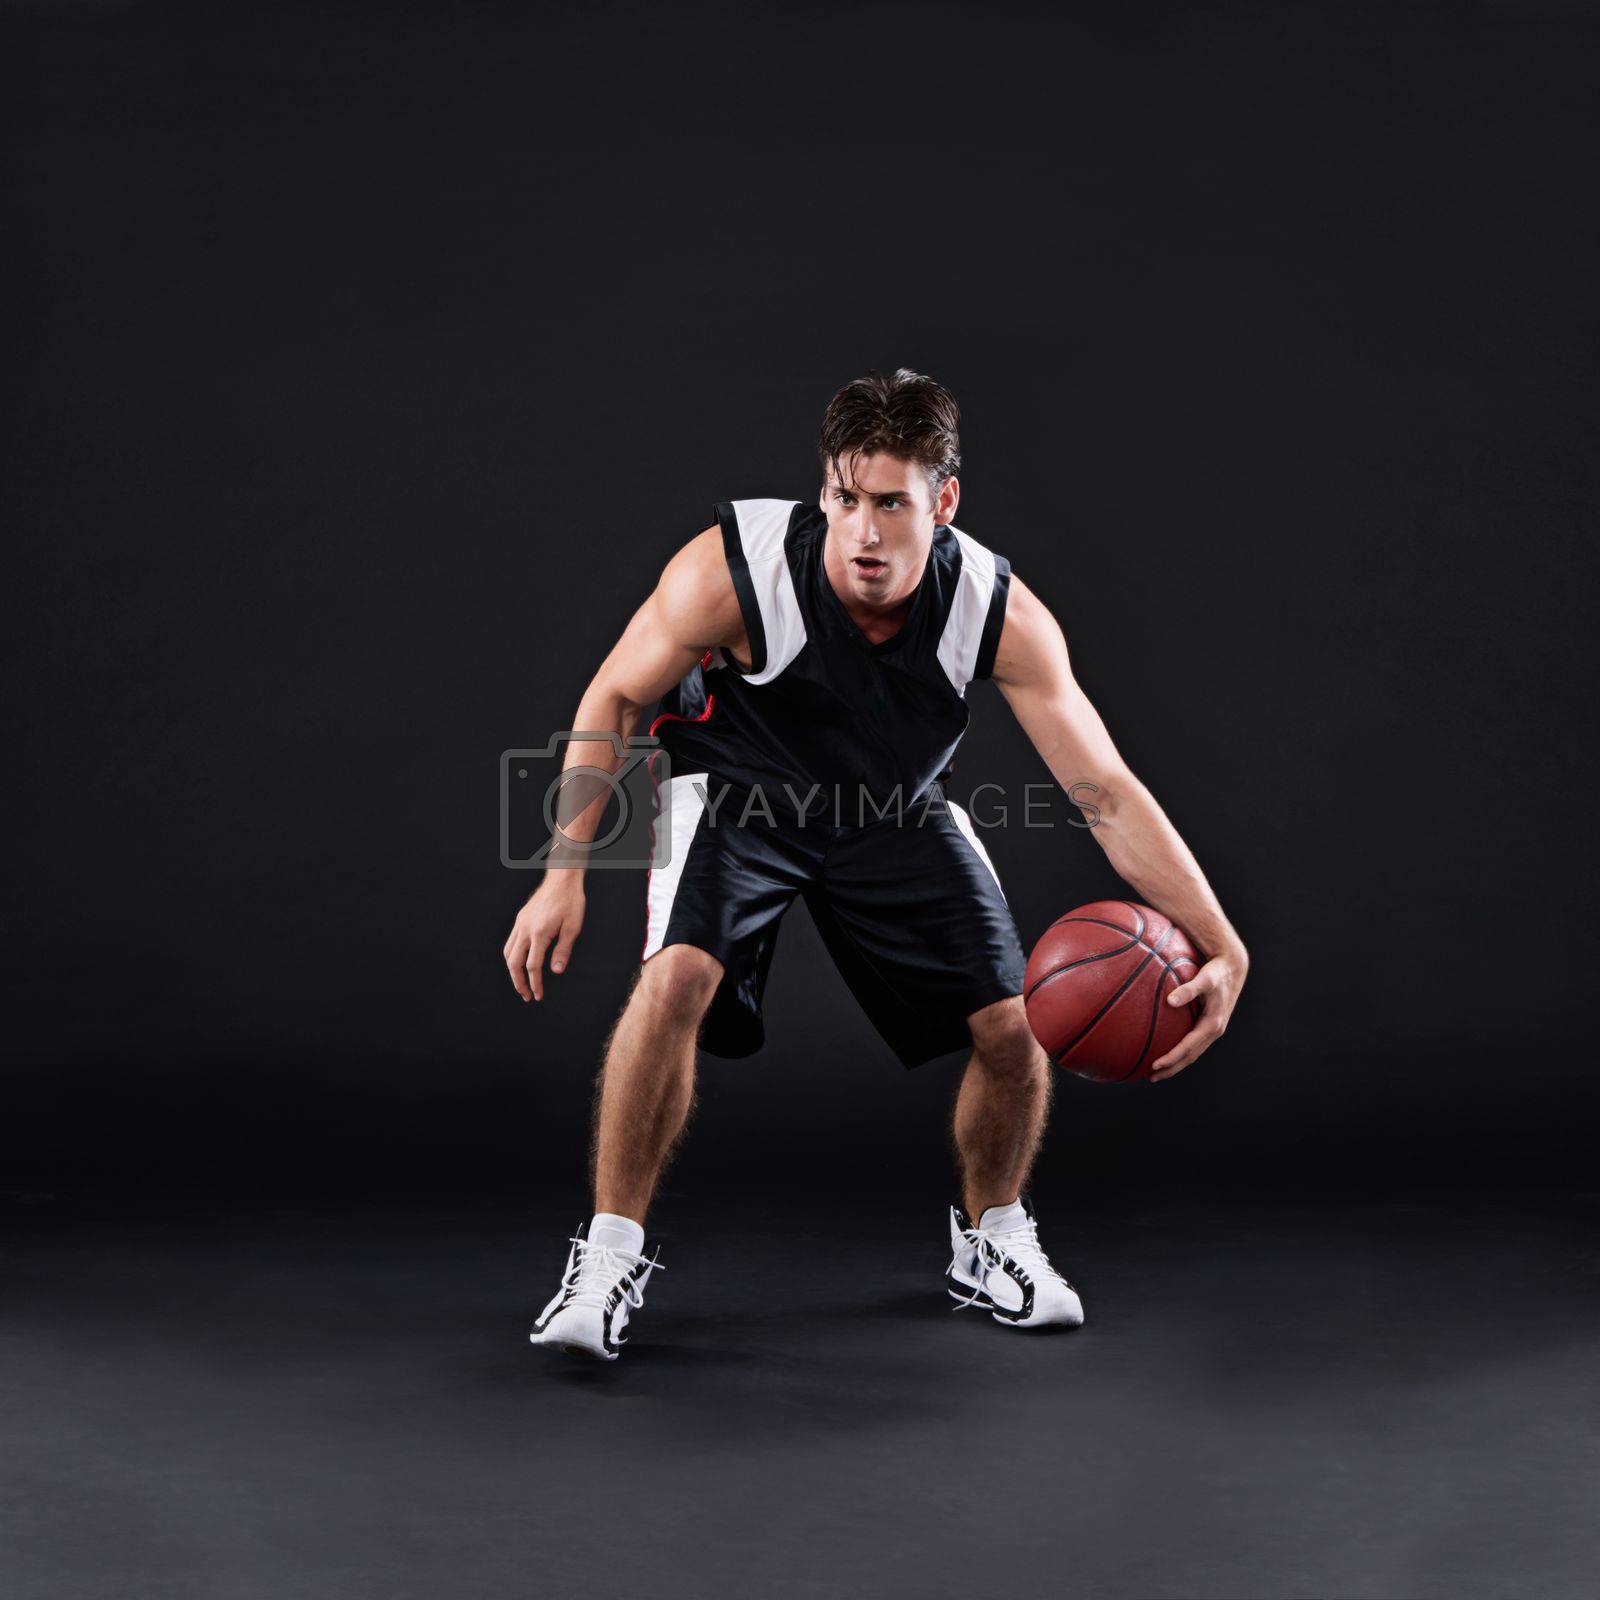 Royalty free image of Dribbling pro. Full length shot of a male basketball player in action against a black background. by YuriArcurs